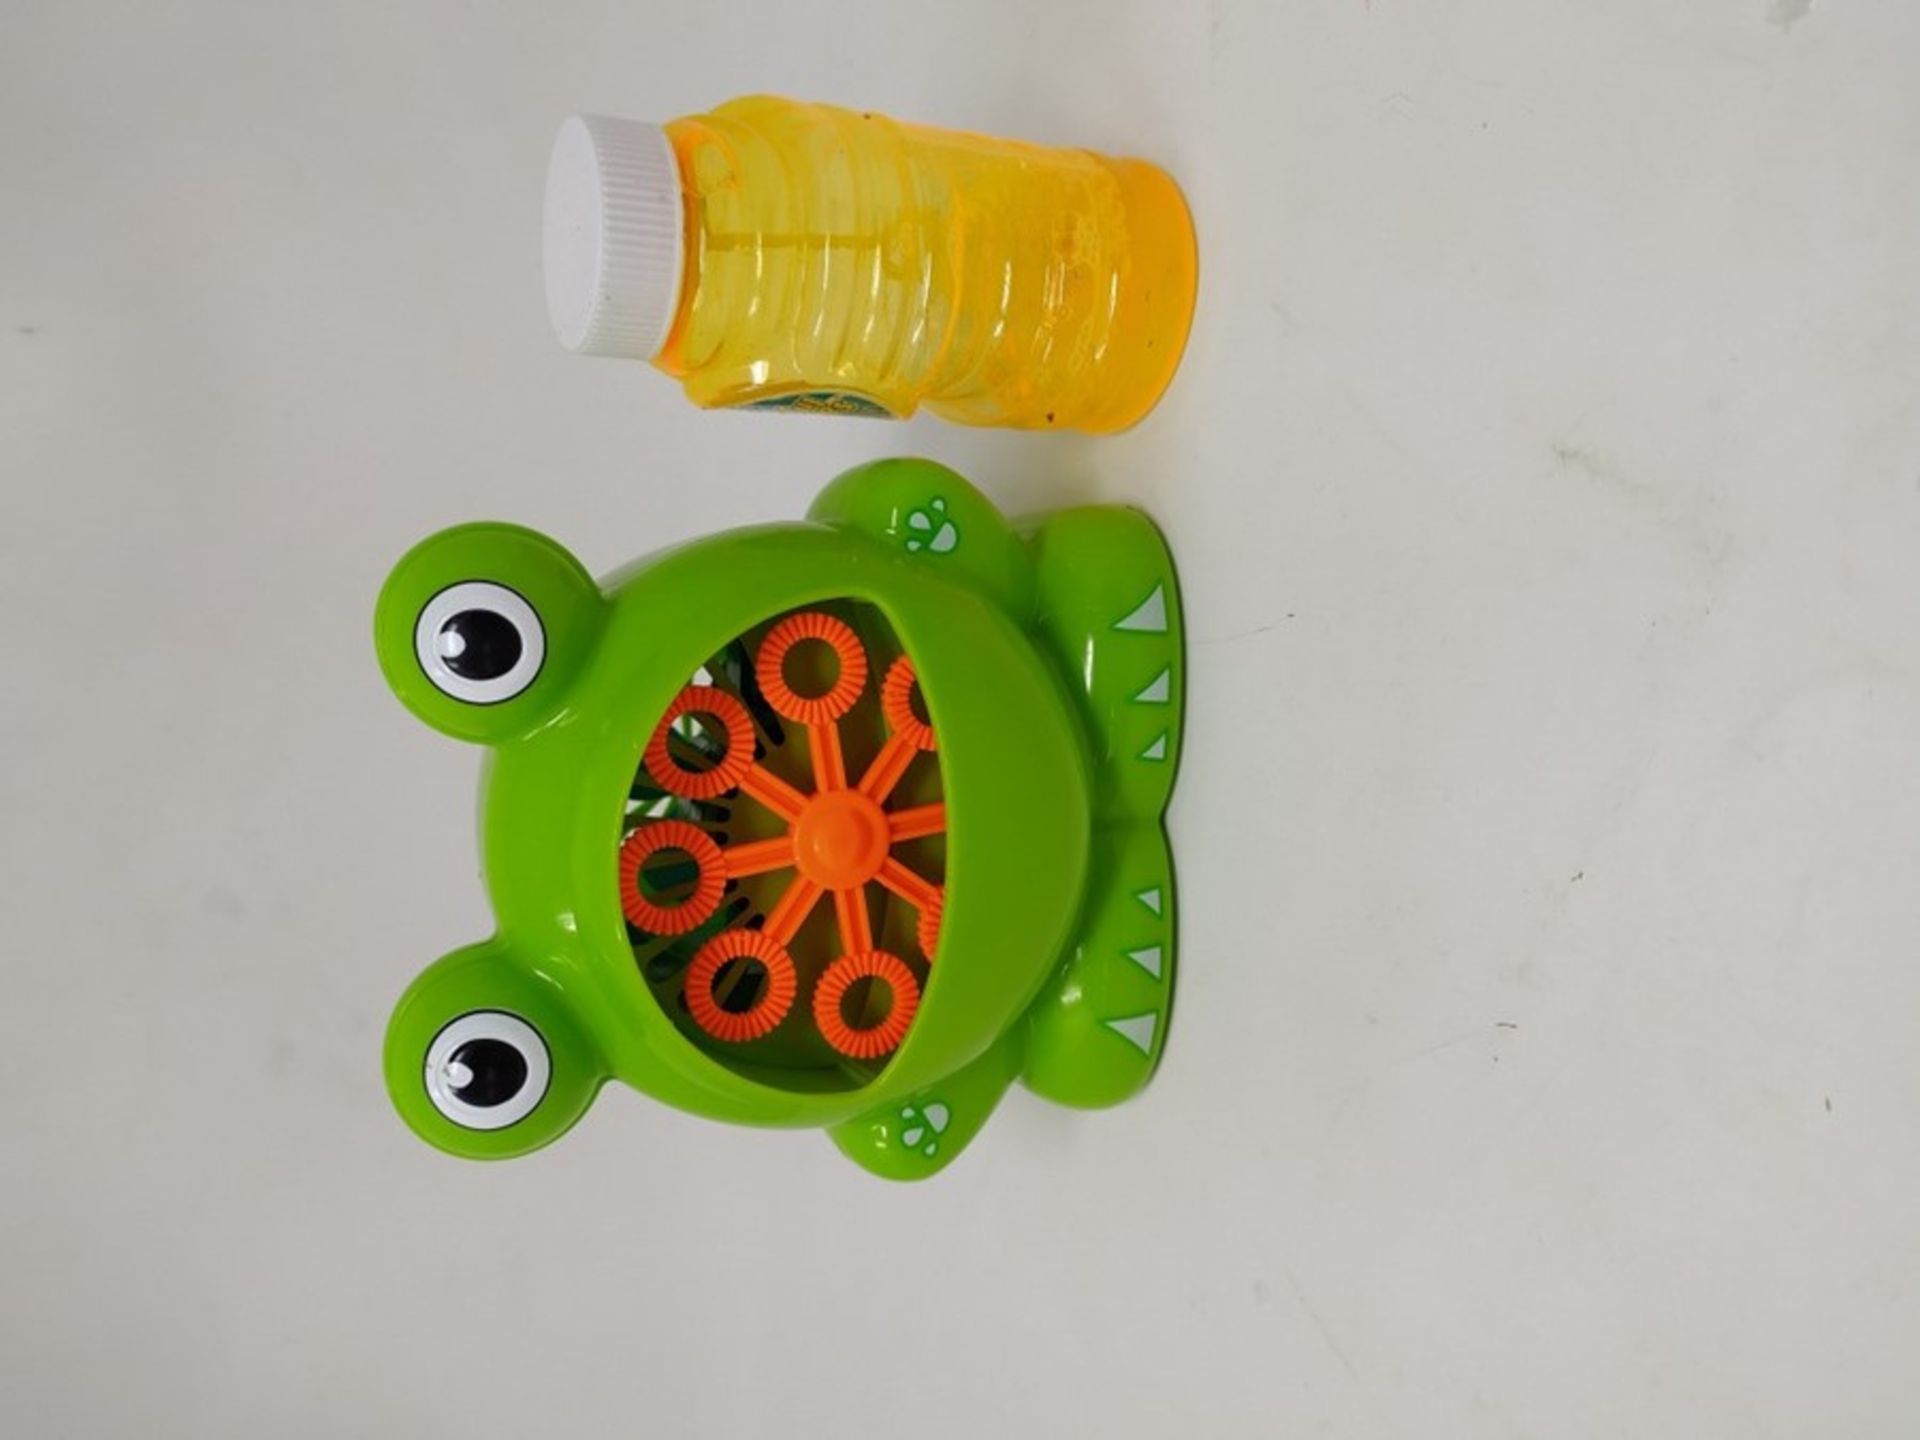 Gamez Jam Frog Bubble Machine for kids, toddlers, babies, grown-ups, even dogs. Bubble - Image 2 of 2